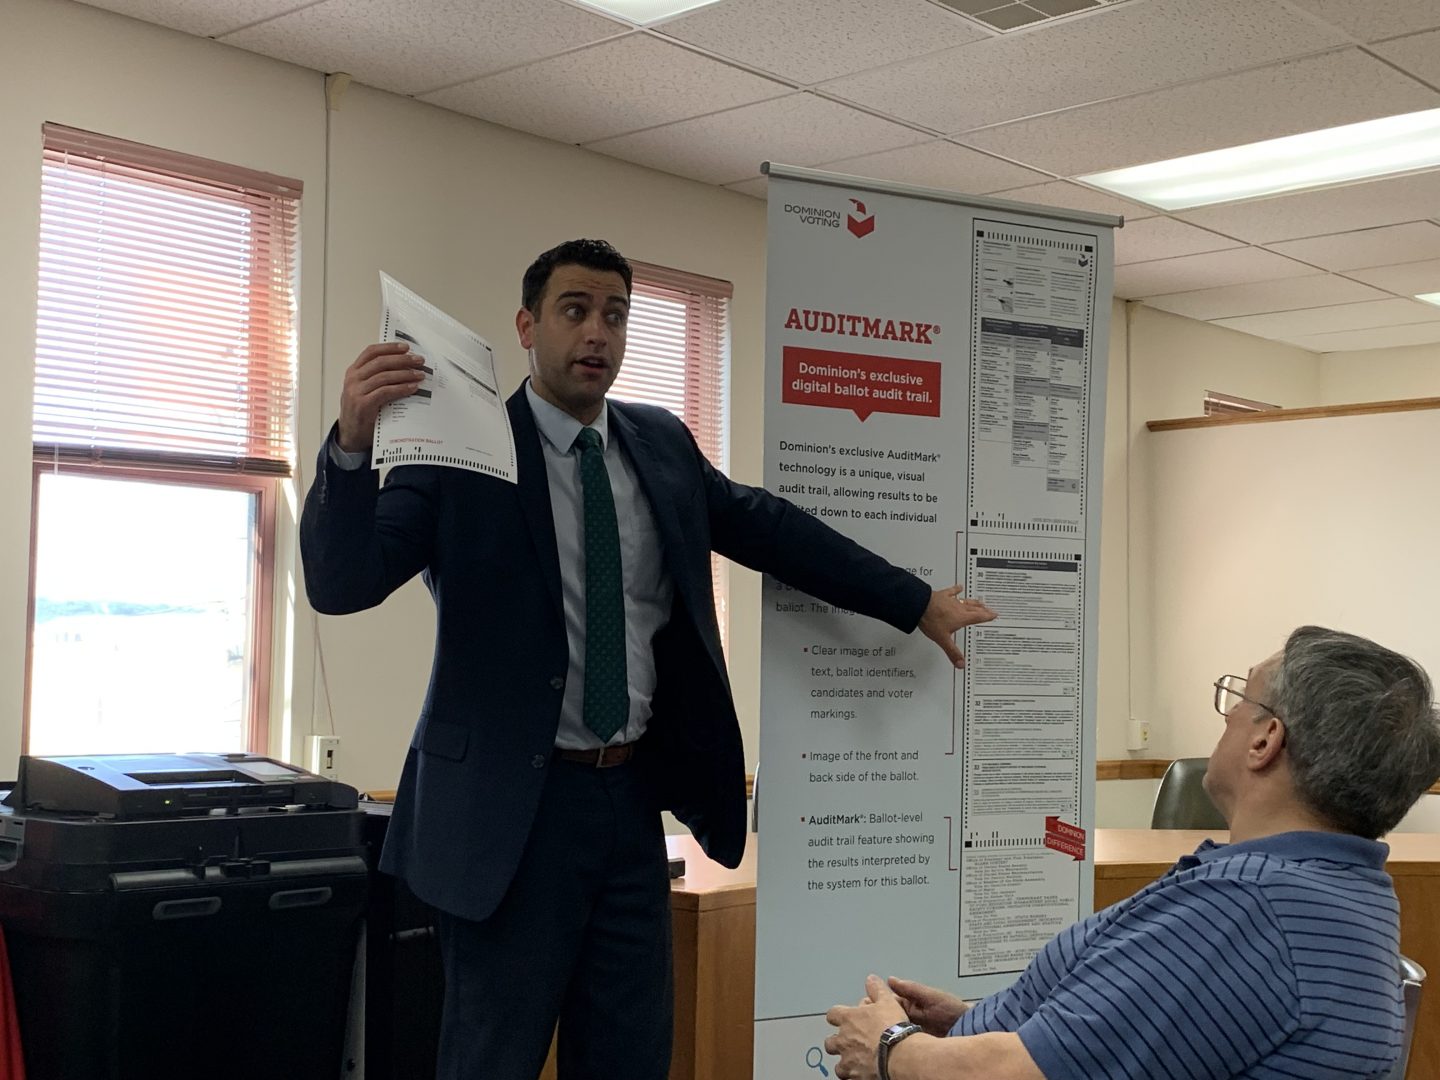 John Hastings, regional sales manager with Dominion Voting Systems, explains how the company's auditing system works to officials in Columbia County June 26, 2019. (Emily Previti, PA Post)